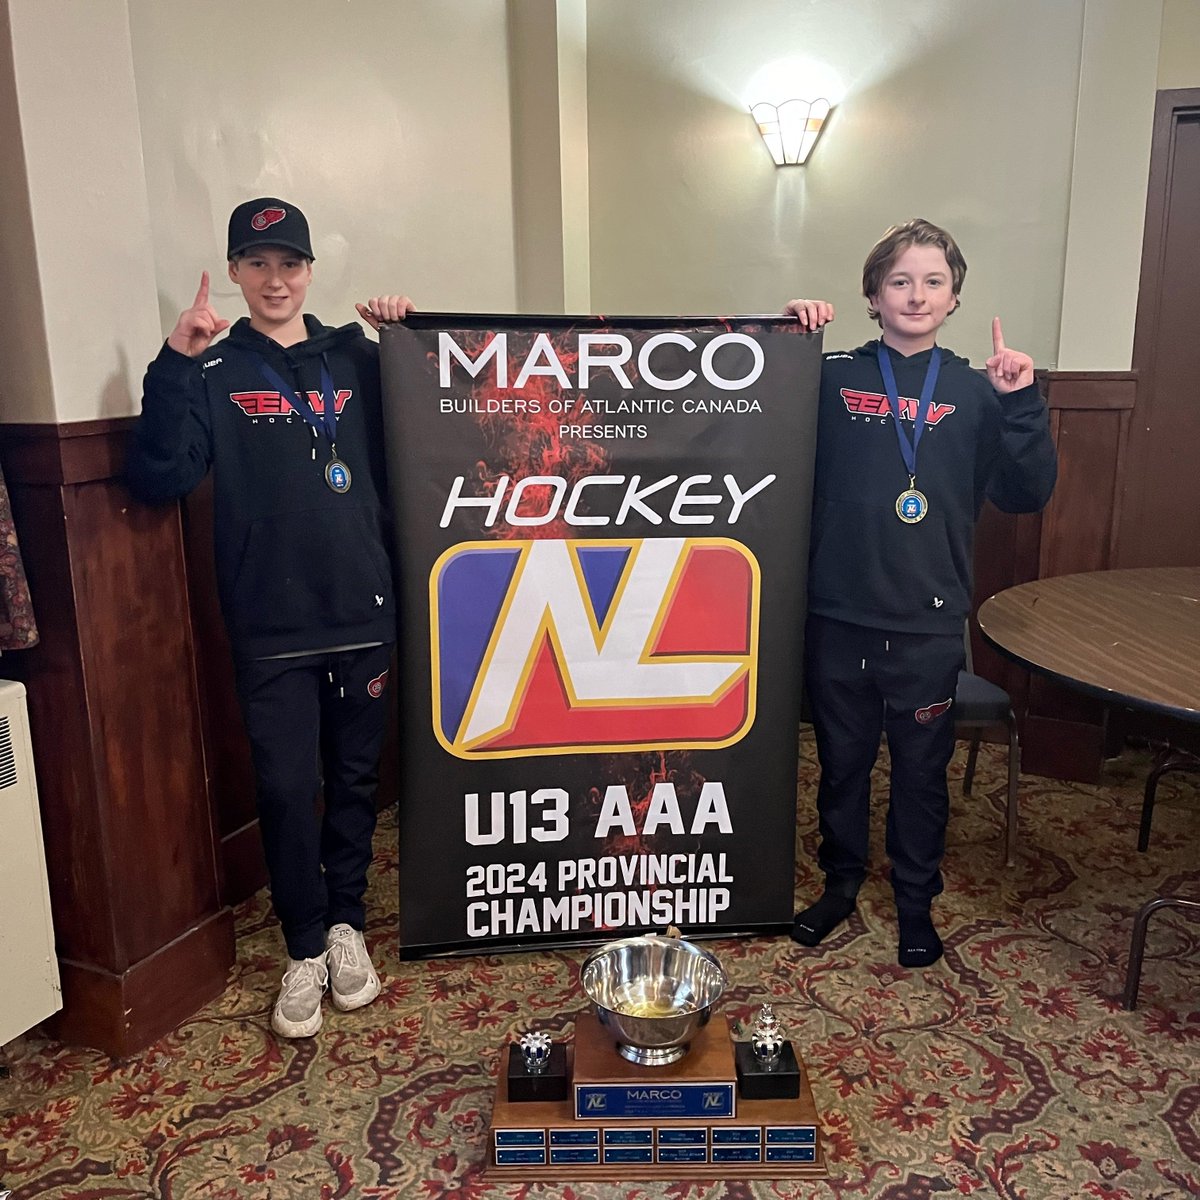 Congrats to CBR’s own Harry Kennedy and Gavin O’Toole who won provincial gold with the U13AAA Red Wings this last weekend. Good luck in the Atlantics!!